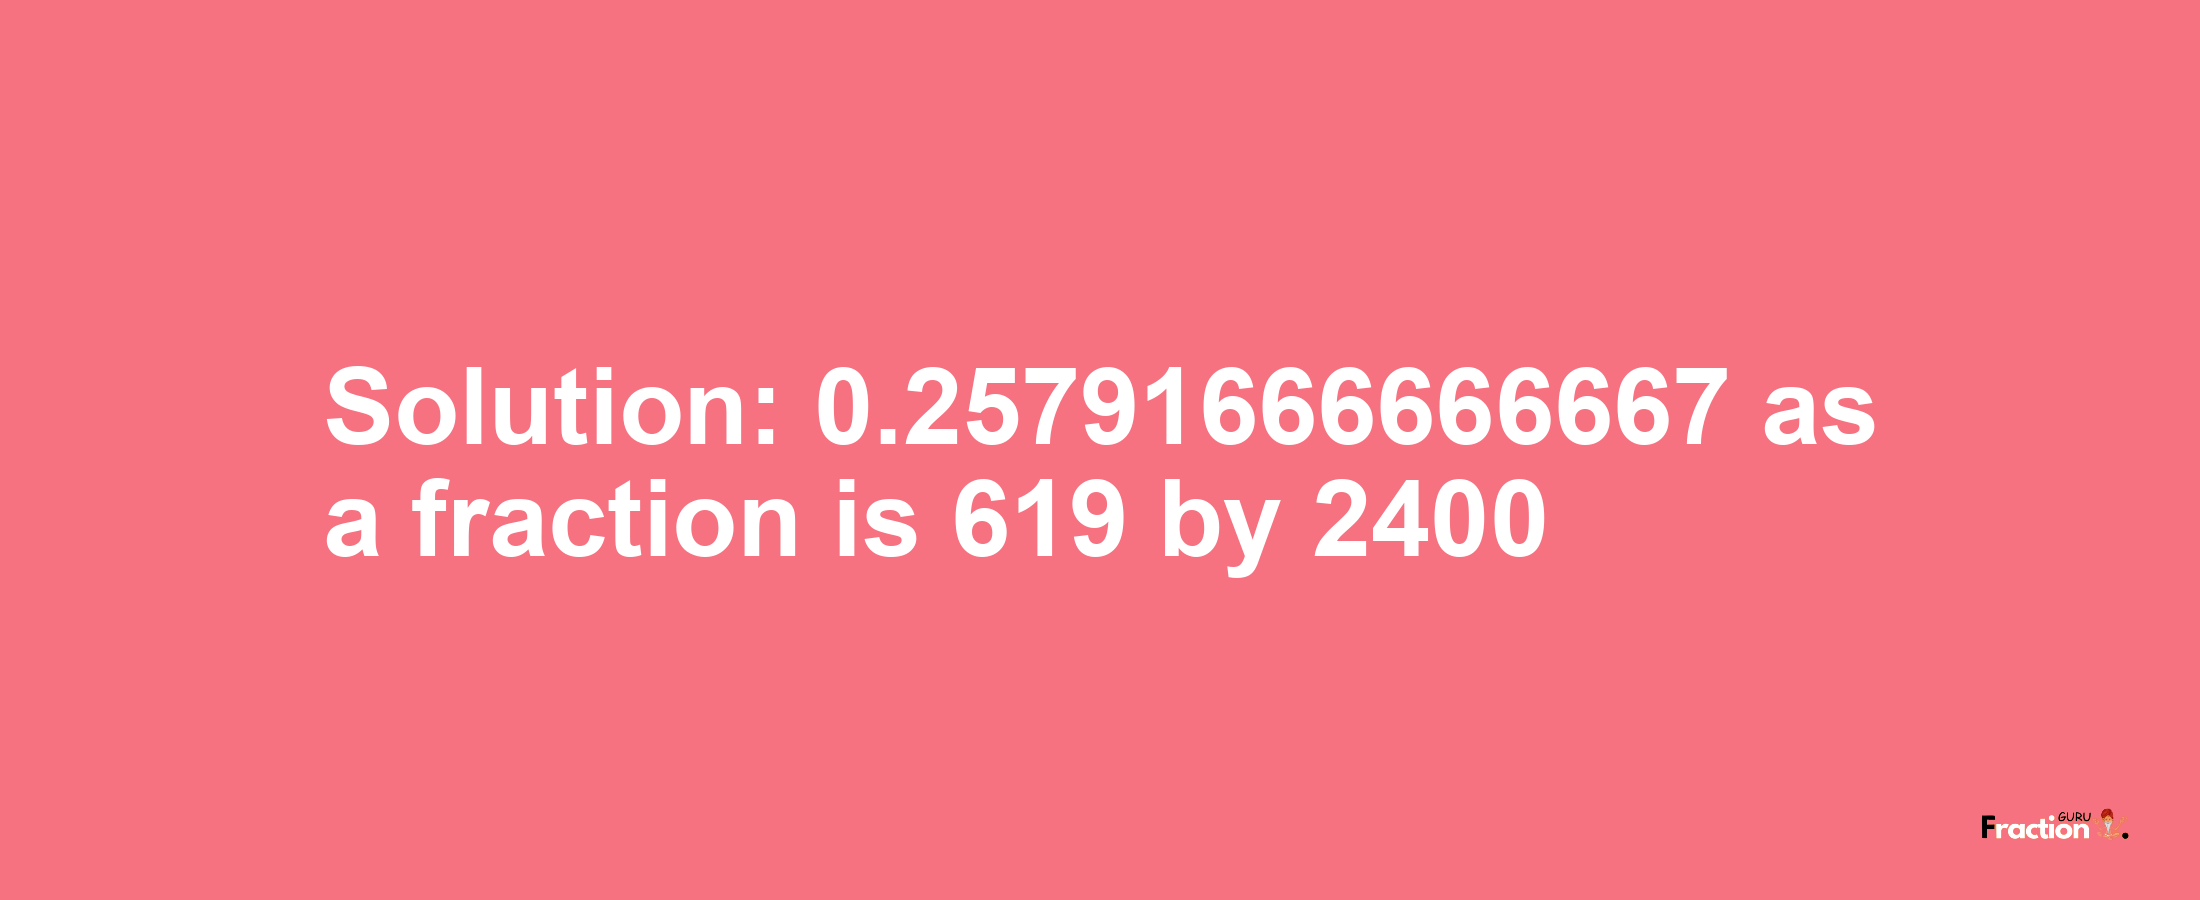 Solution:0.25791666666667 as a fraction is 619/2400